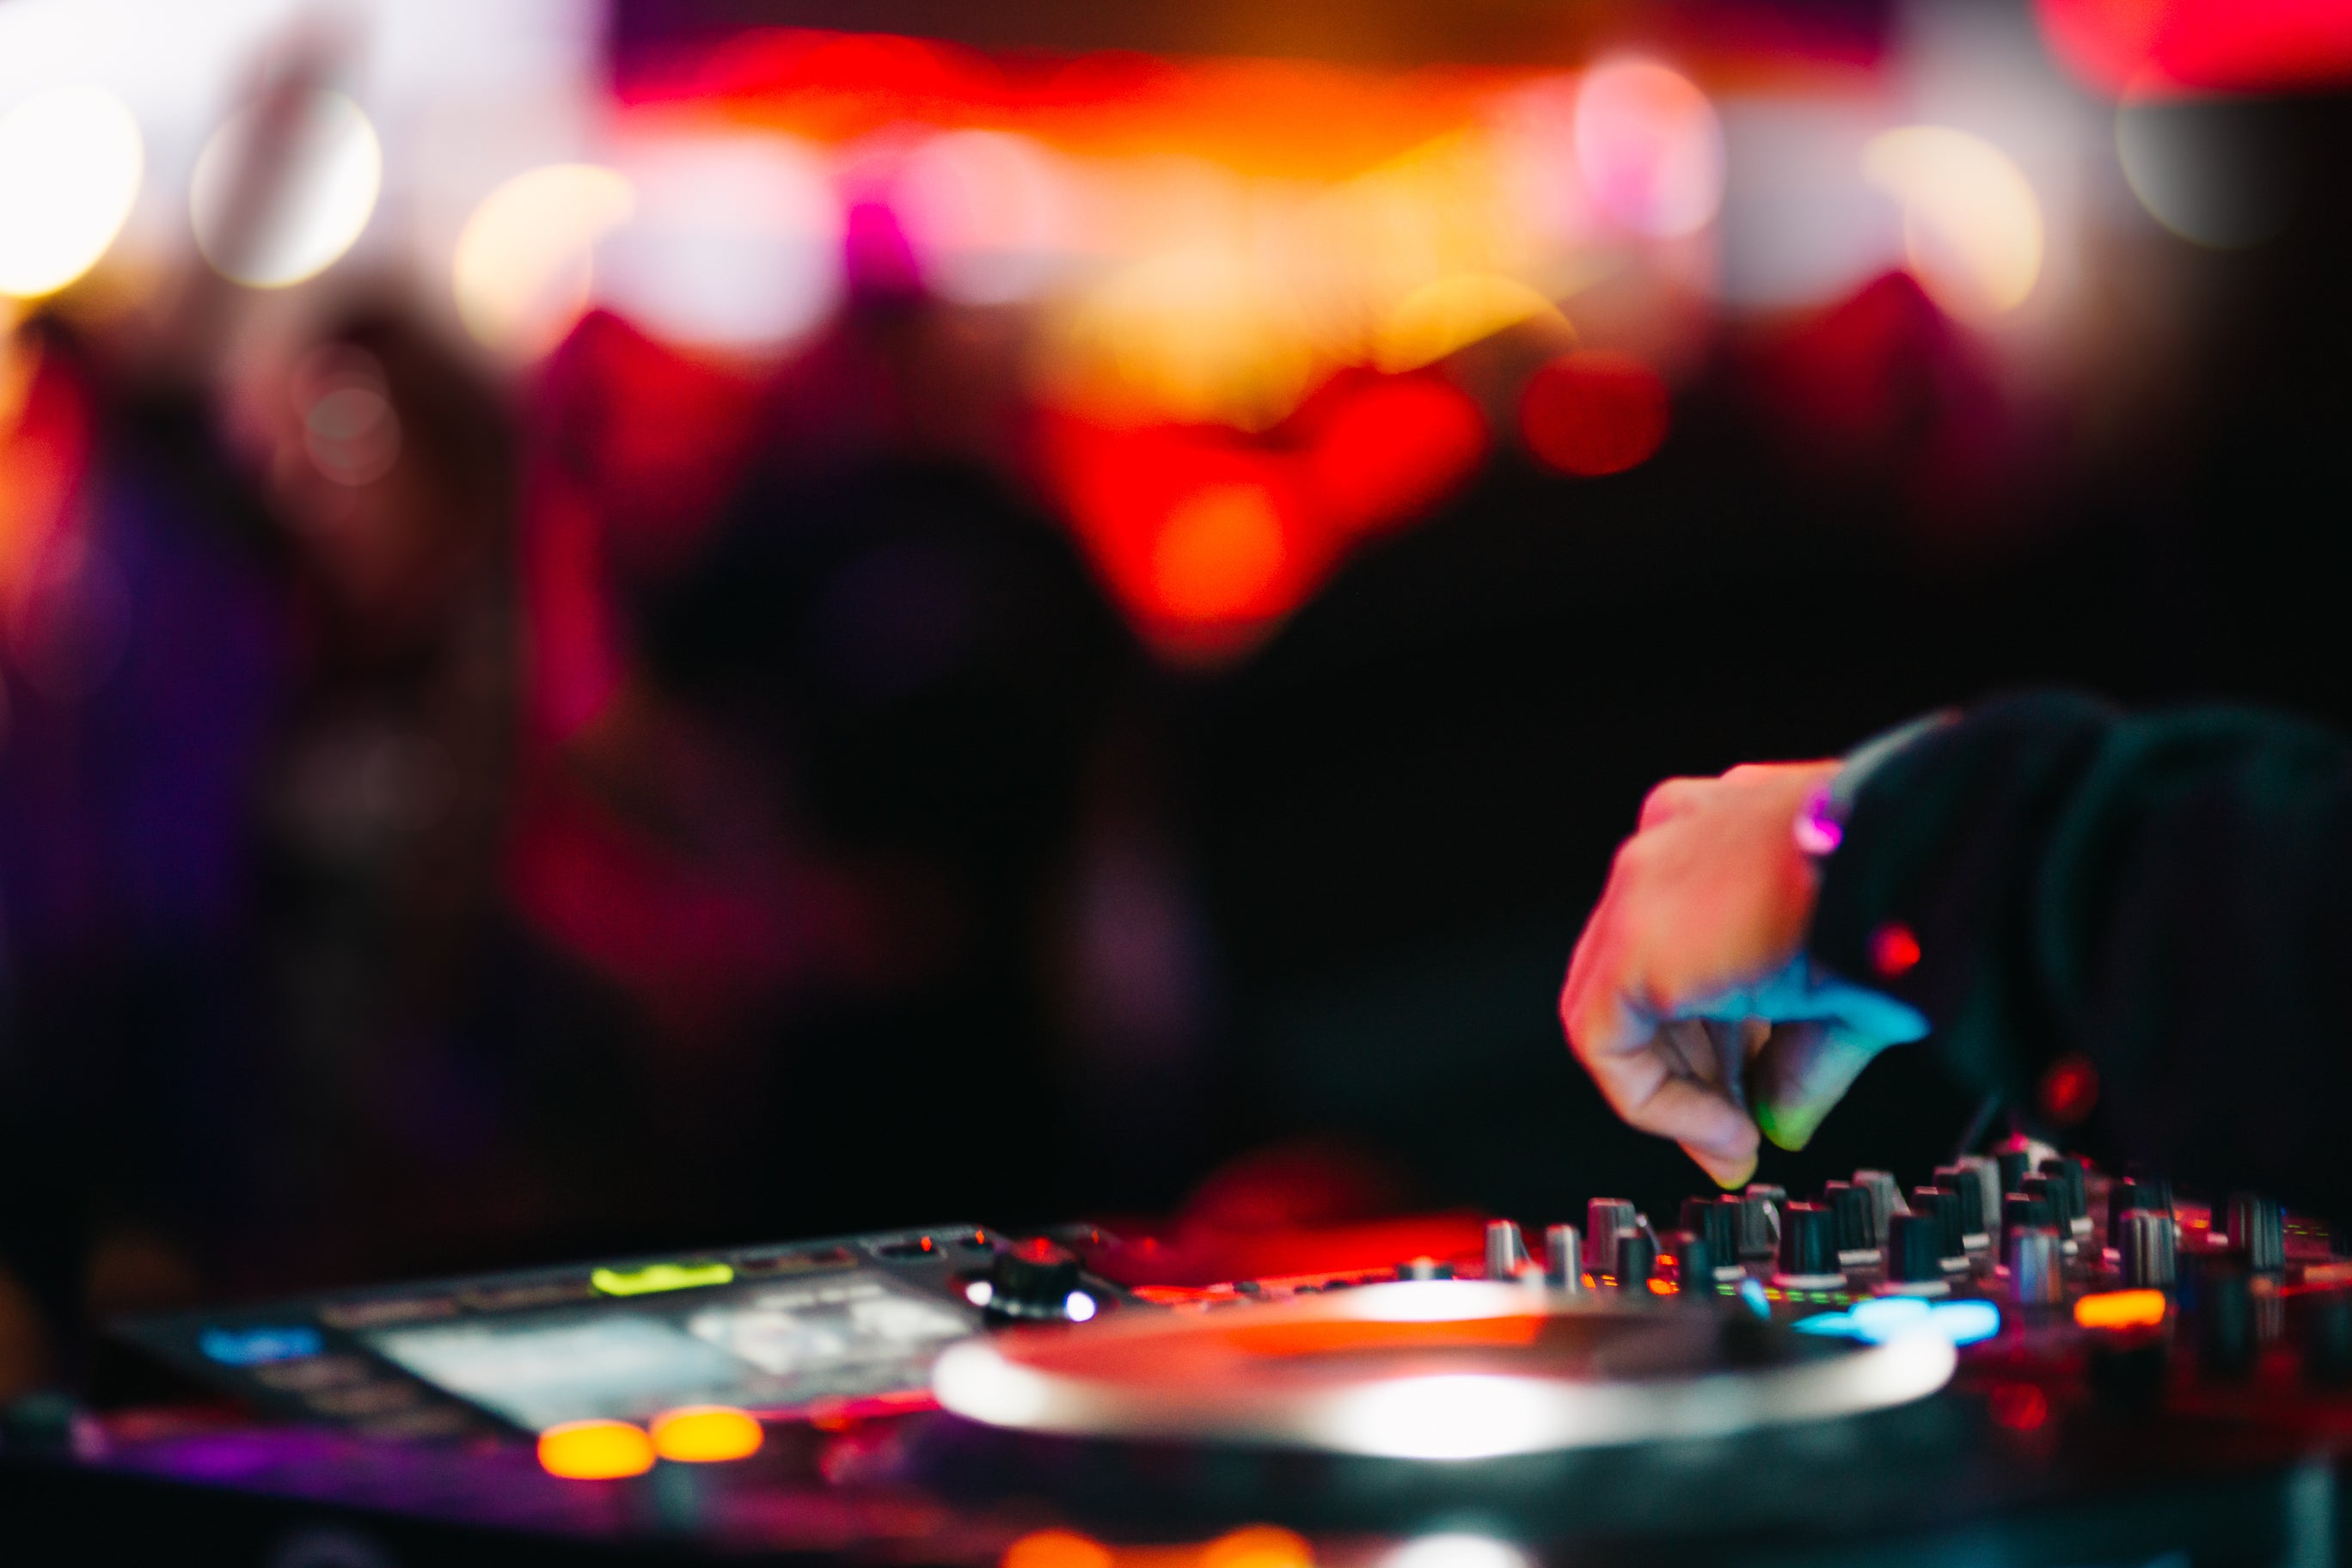 A DJ spinning in front of a dance club crowd.